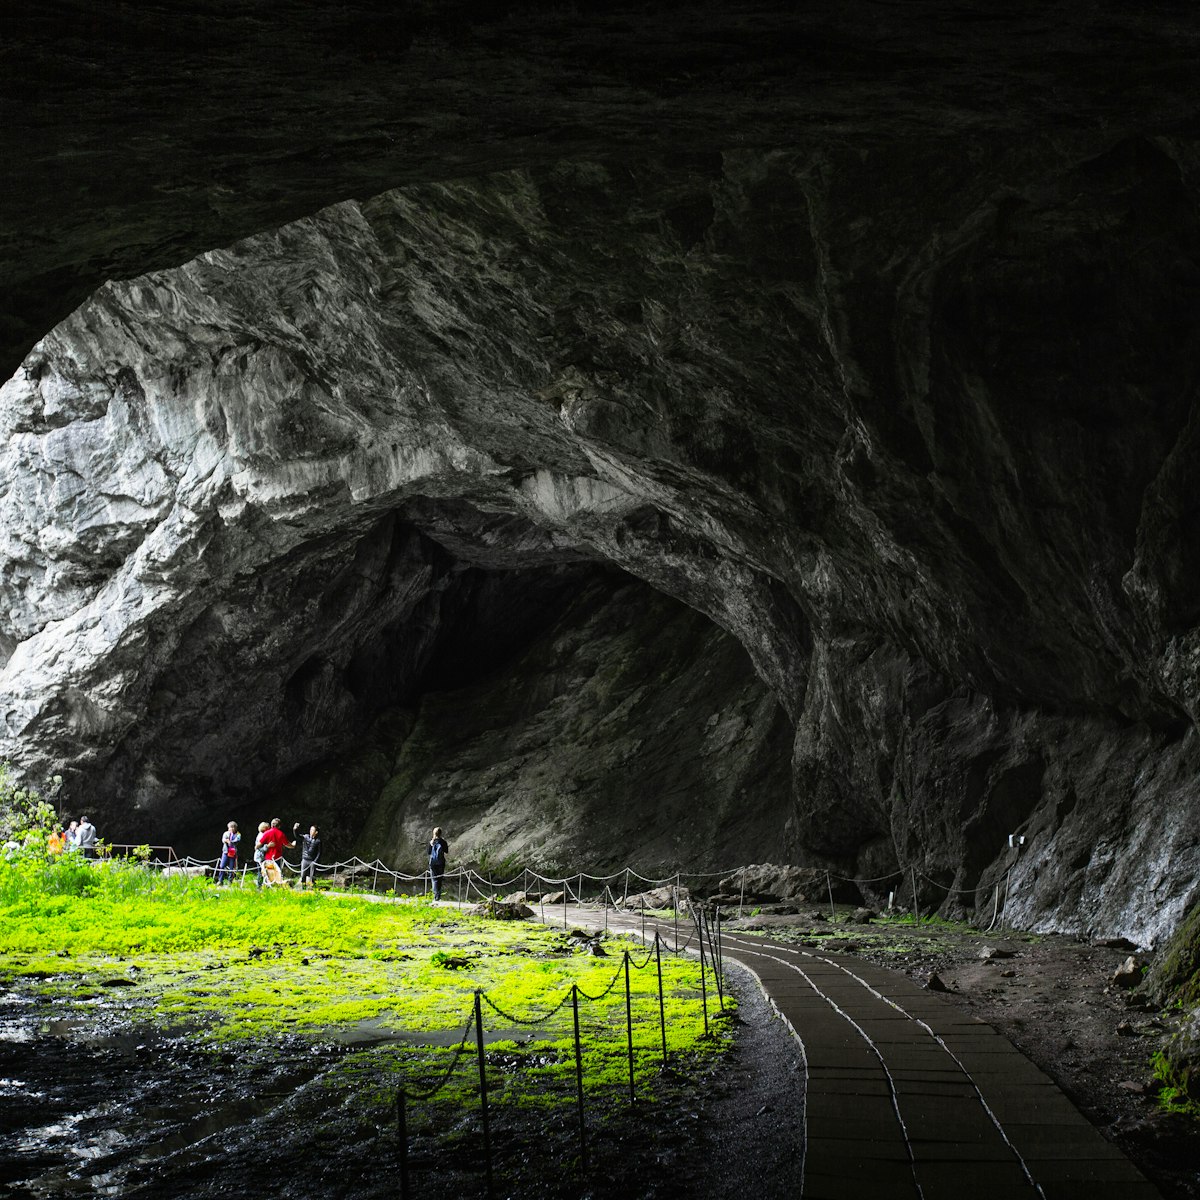 Entrance to the Kapova Cave located in the Shulgan Tash Nature Reserve, Ural, Russia.